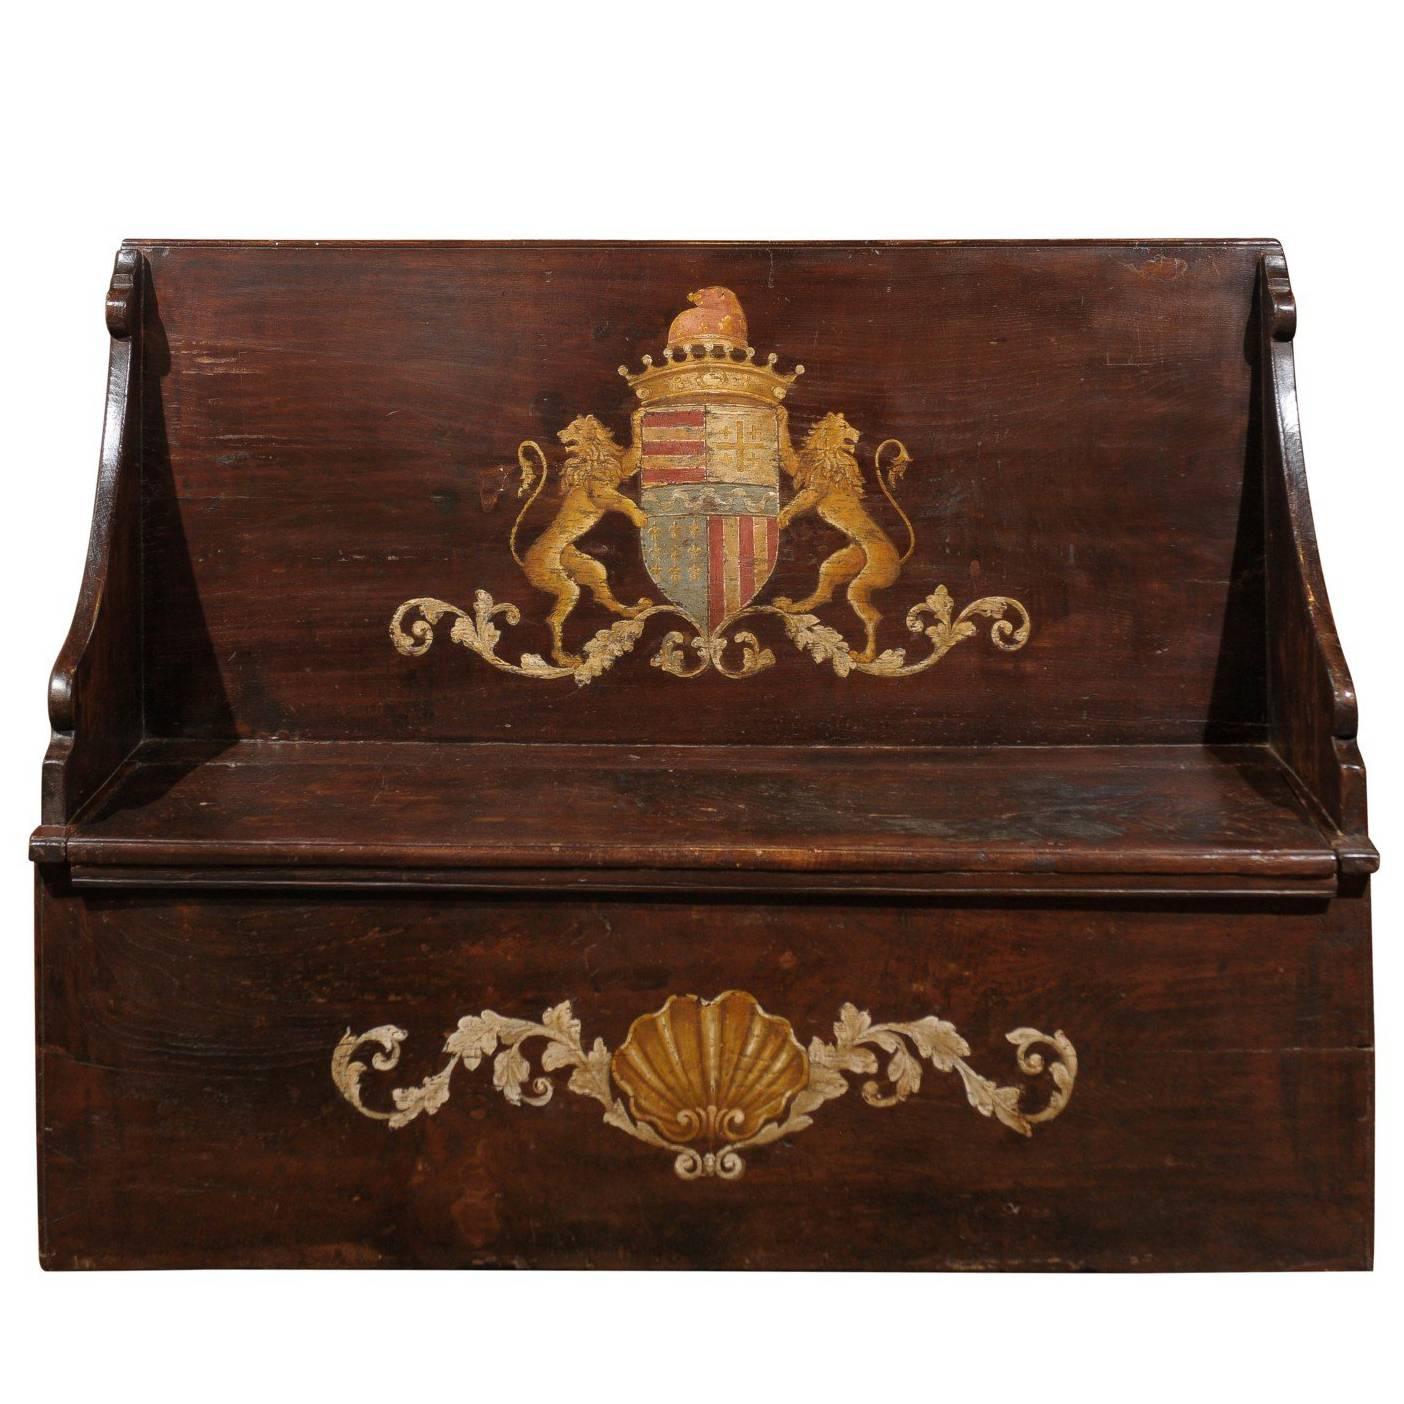 Italian Wooden Hall Bench with Painted Coat of Arms and Hinged Seat Circa 1800